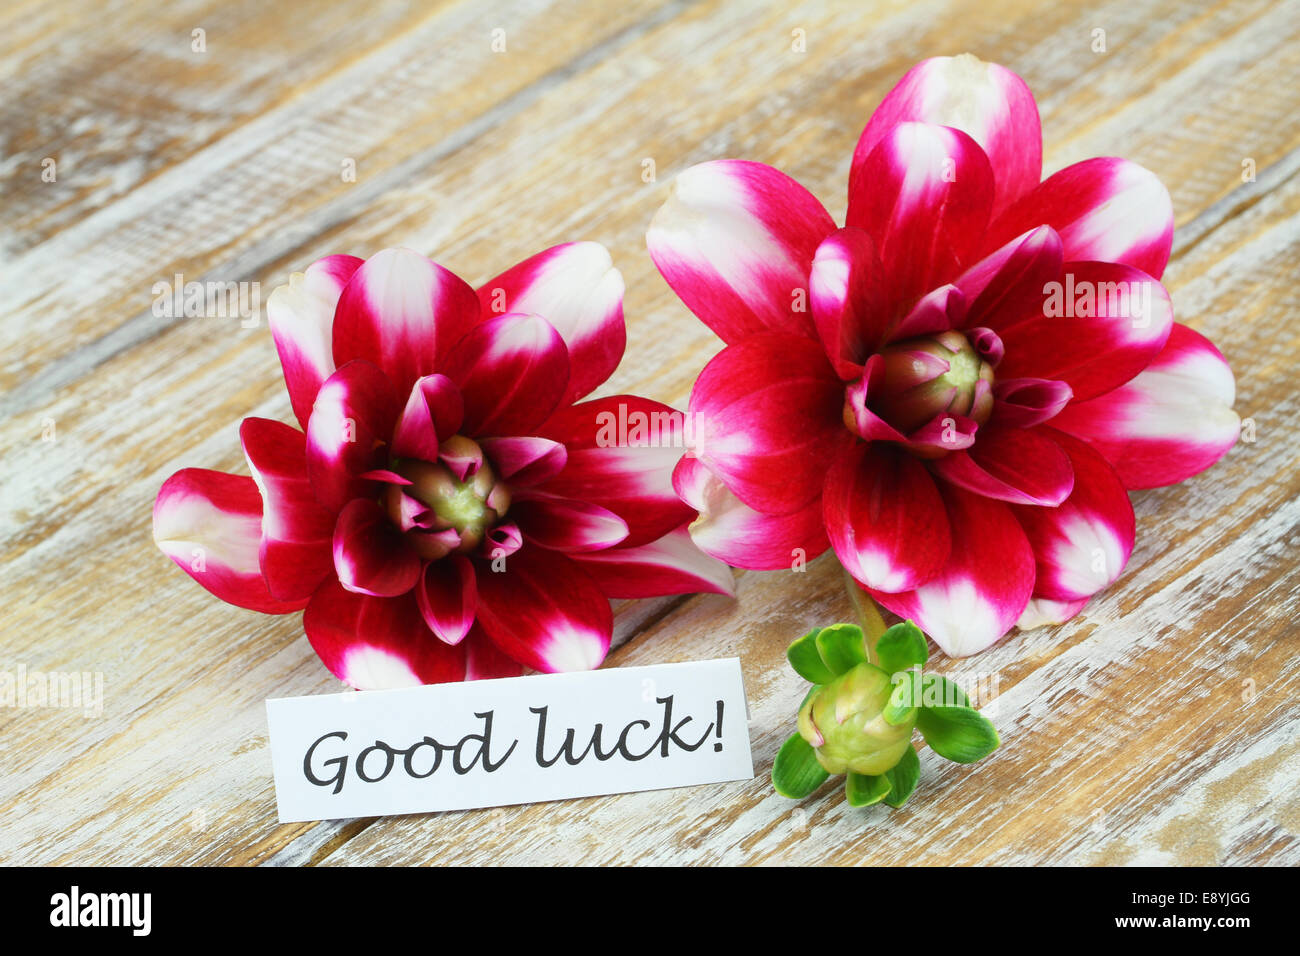 Good luck card with red dahlia flowers on wooden surface Stock Photo